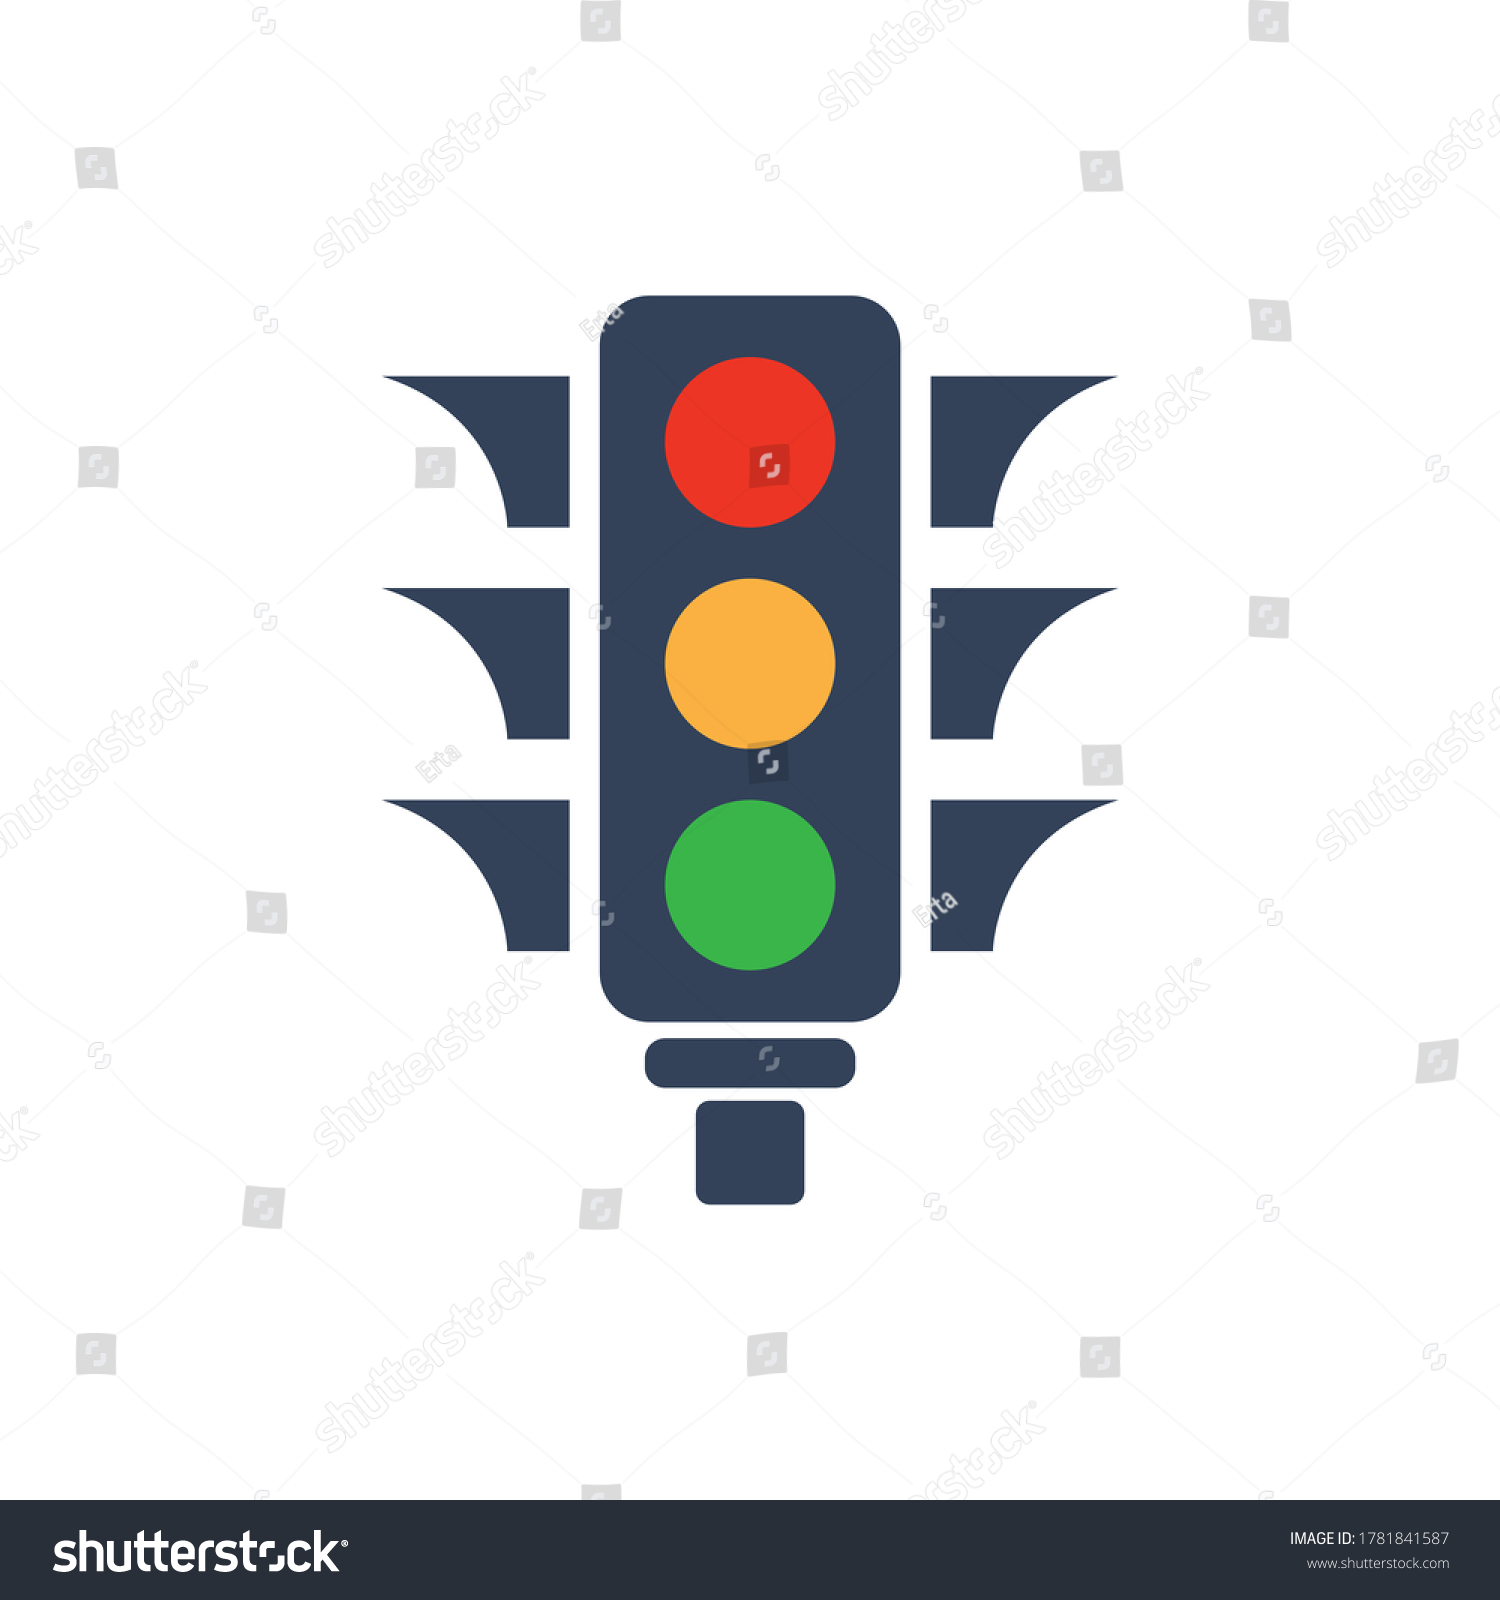 Traffic Lights Icon Design Isolated On Stock Vector Royalty Free Shutterstock